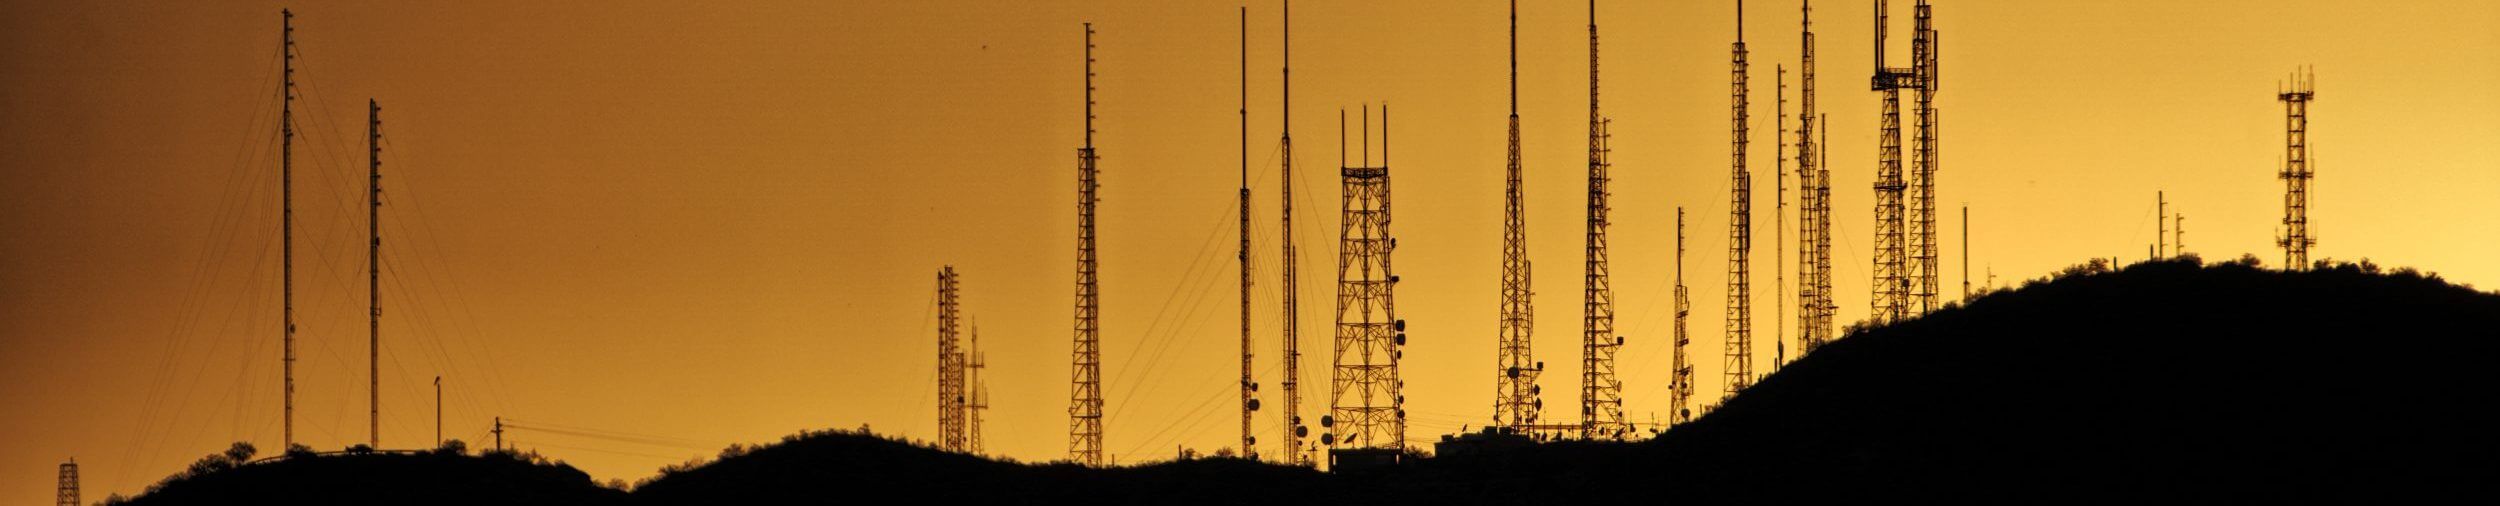 Cell Towers on a Hill